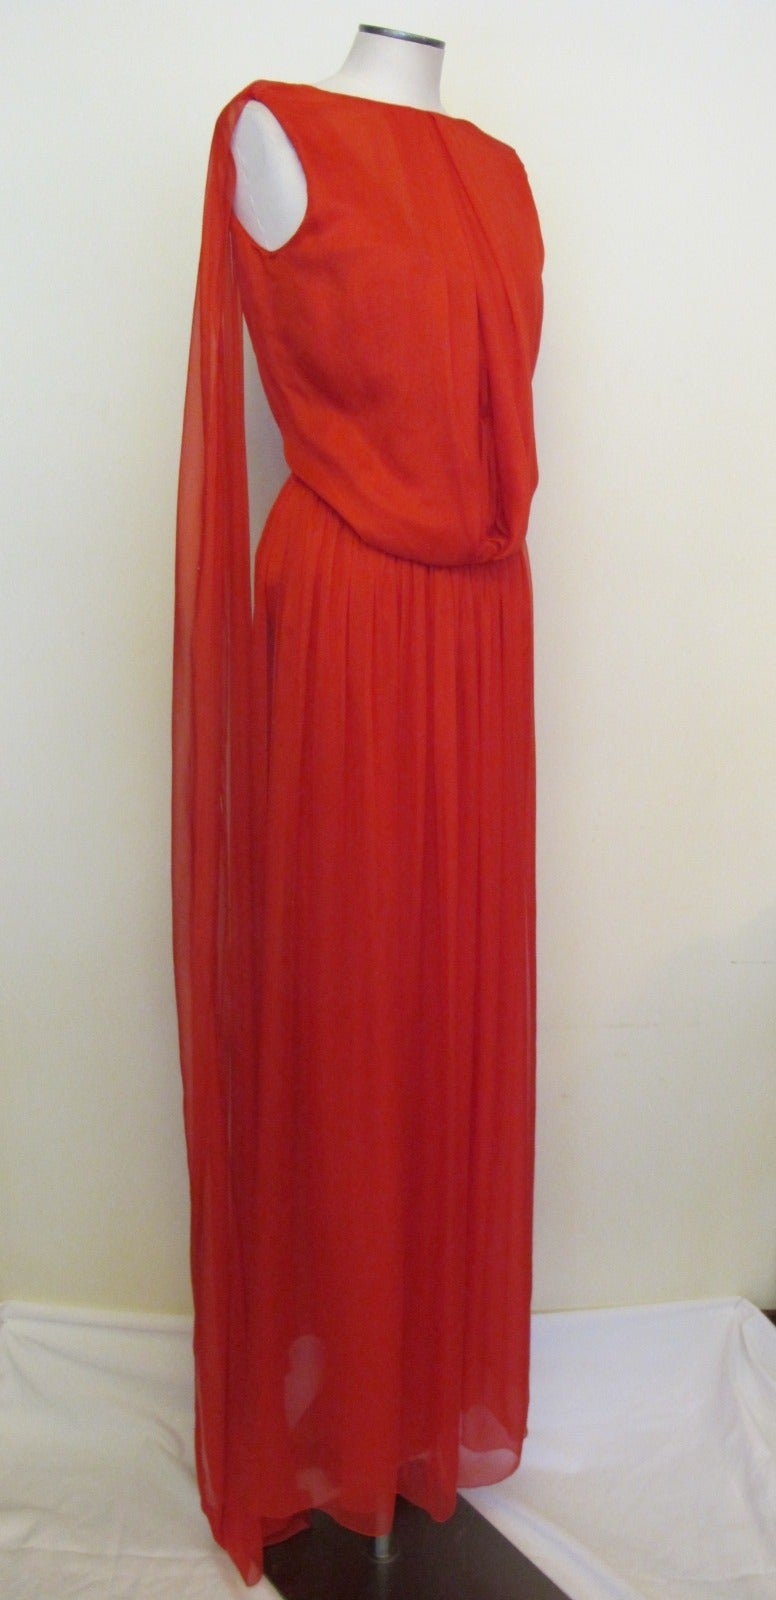 This exquisite red silk chiffon sleeveless evening gown is ready for the red carpet. The blouson bodice will accommodate a 34 or larger bust. There are two panels that gather in the front. Two panels are flying in back of gown, cascading from the